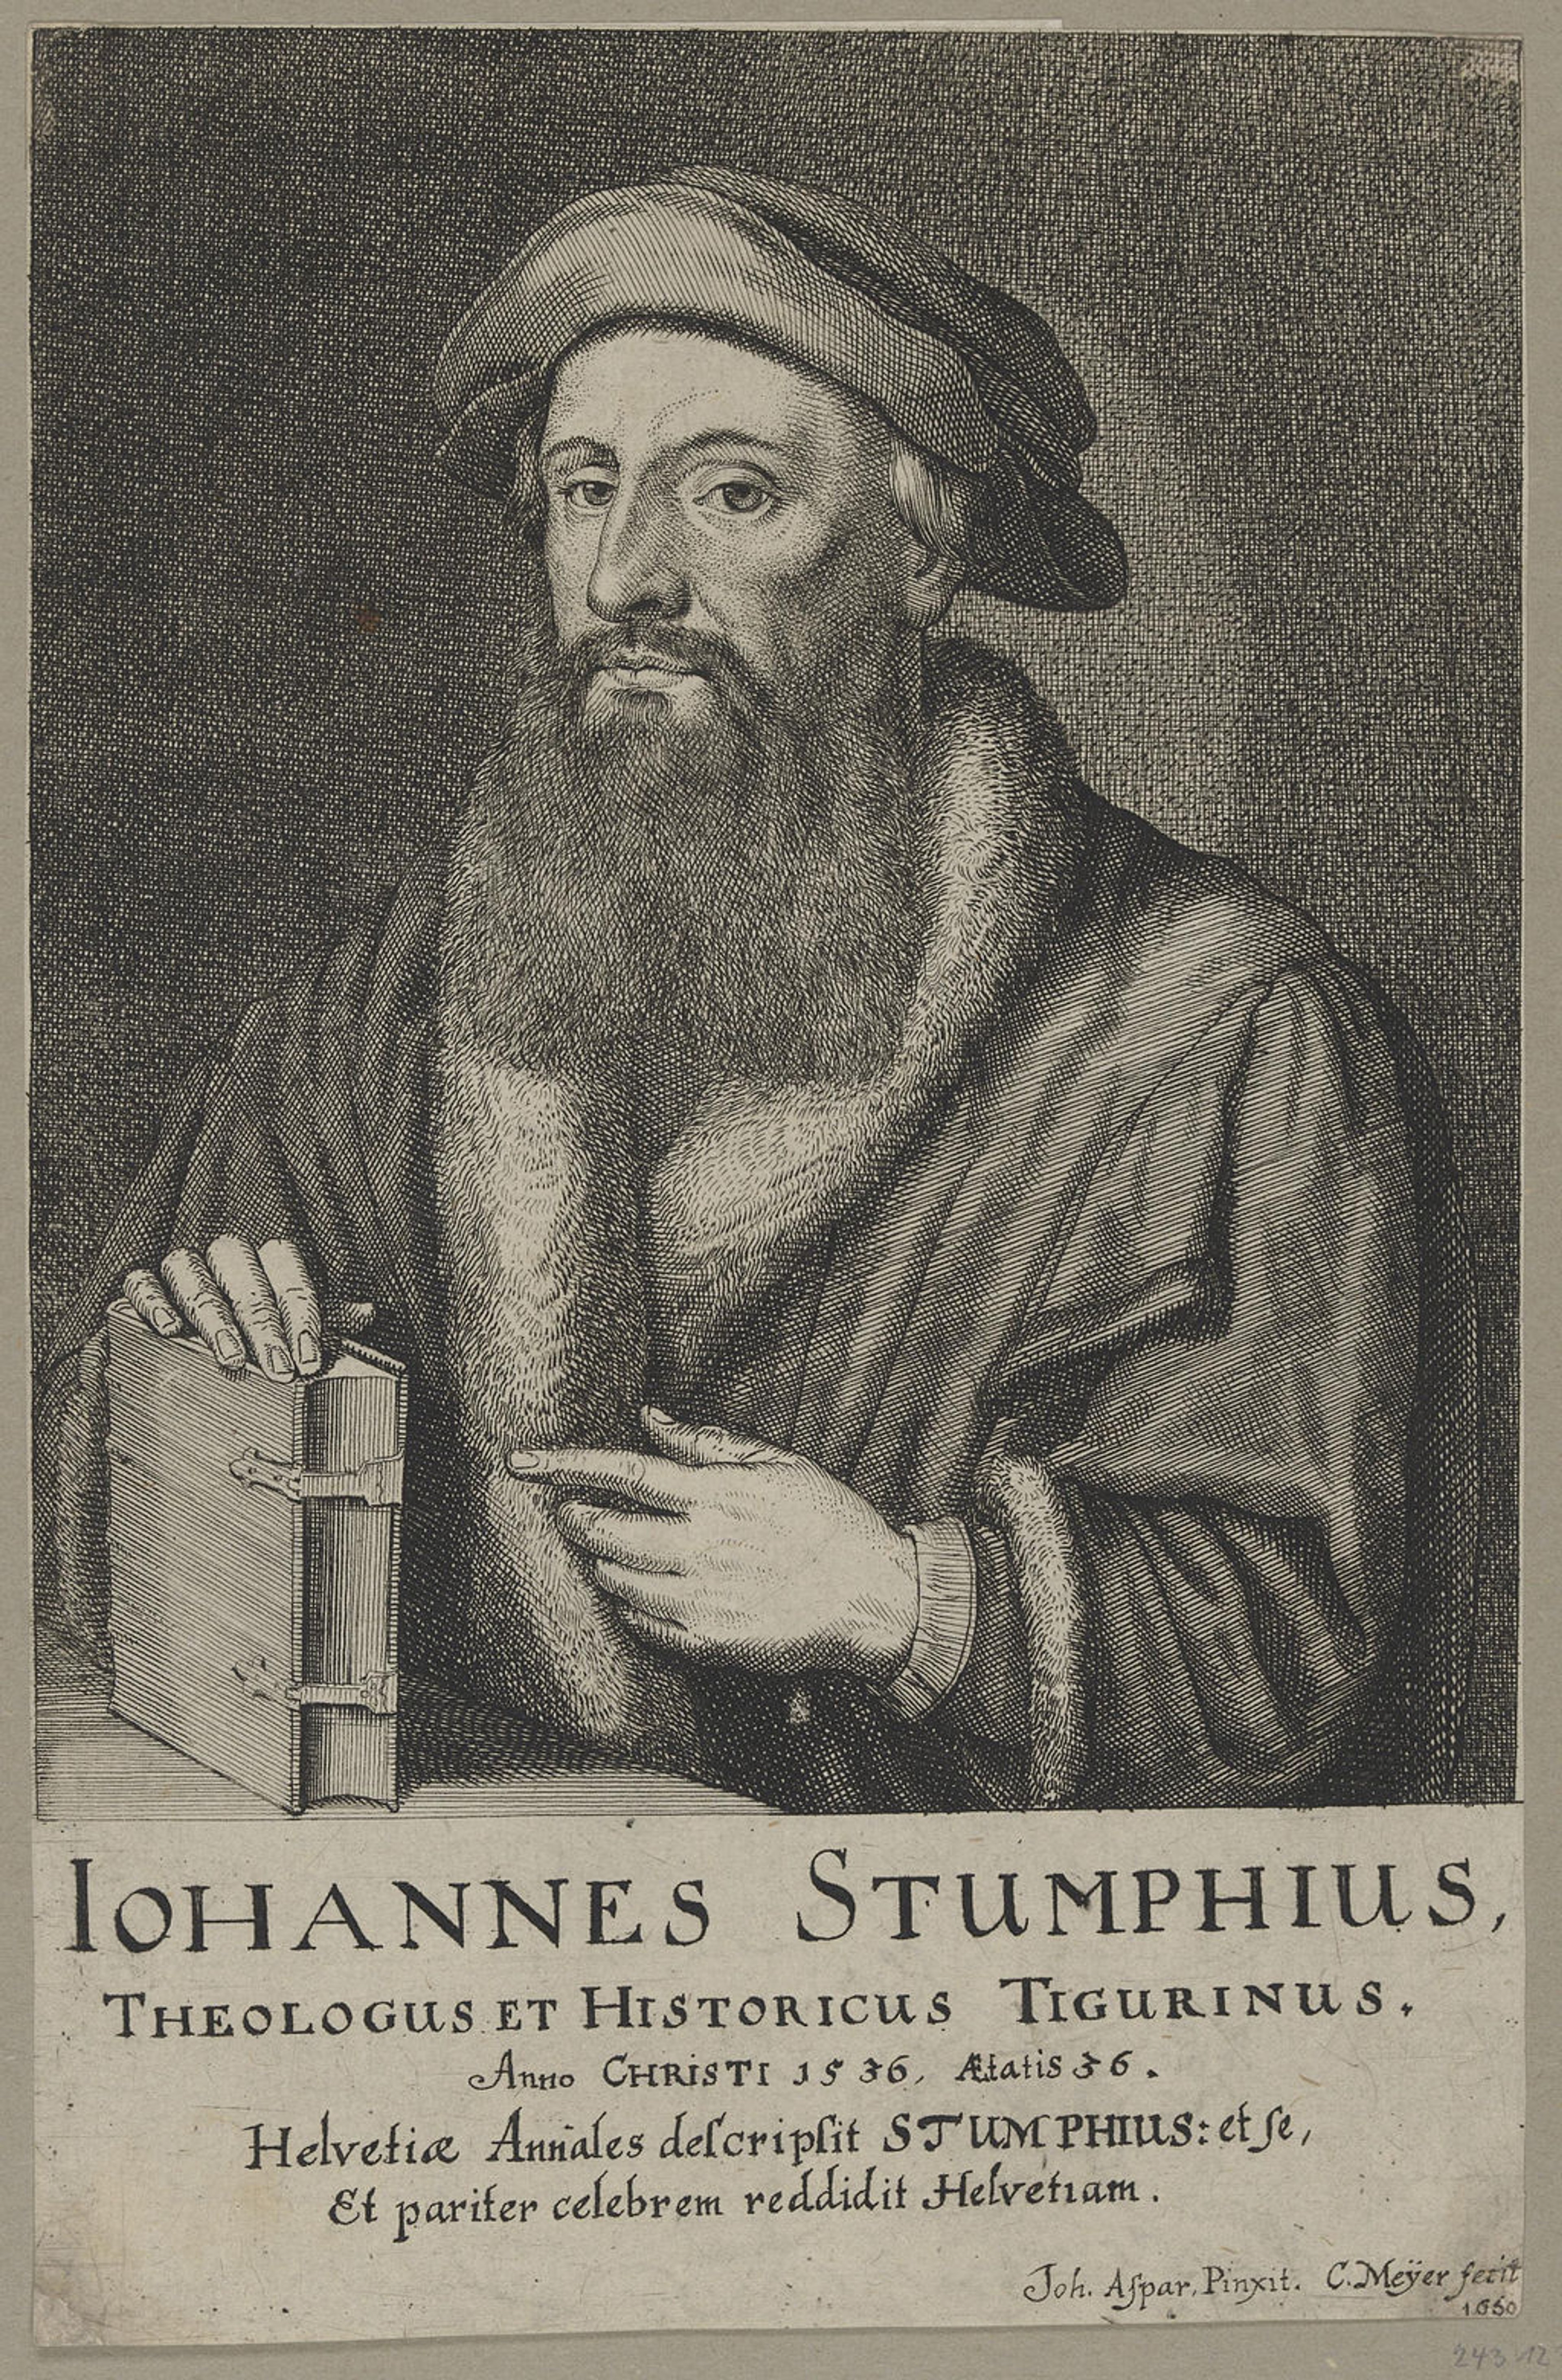 Black and white portrait of Johannes Stumpff, a man with a long beard and a hat, with text that reads: Iohannes Stumphius, Theologus et Historicus Tigurinus.